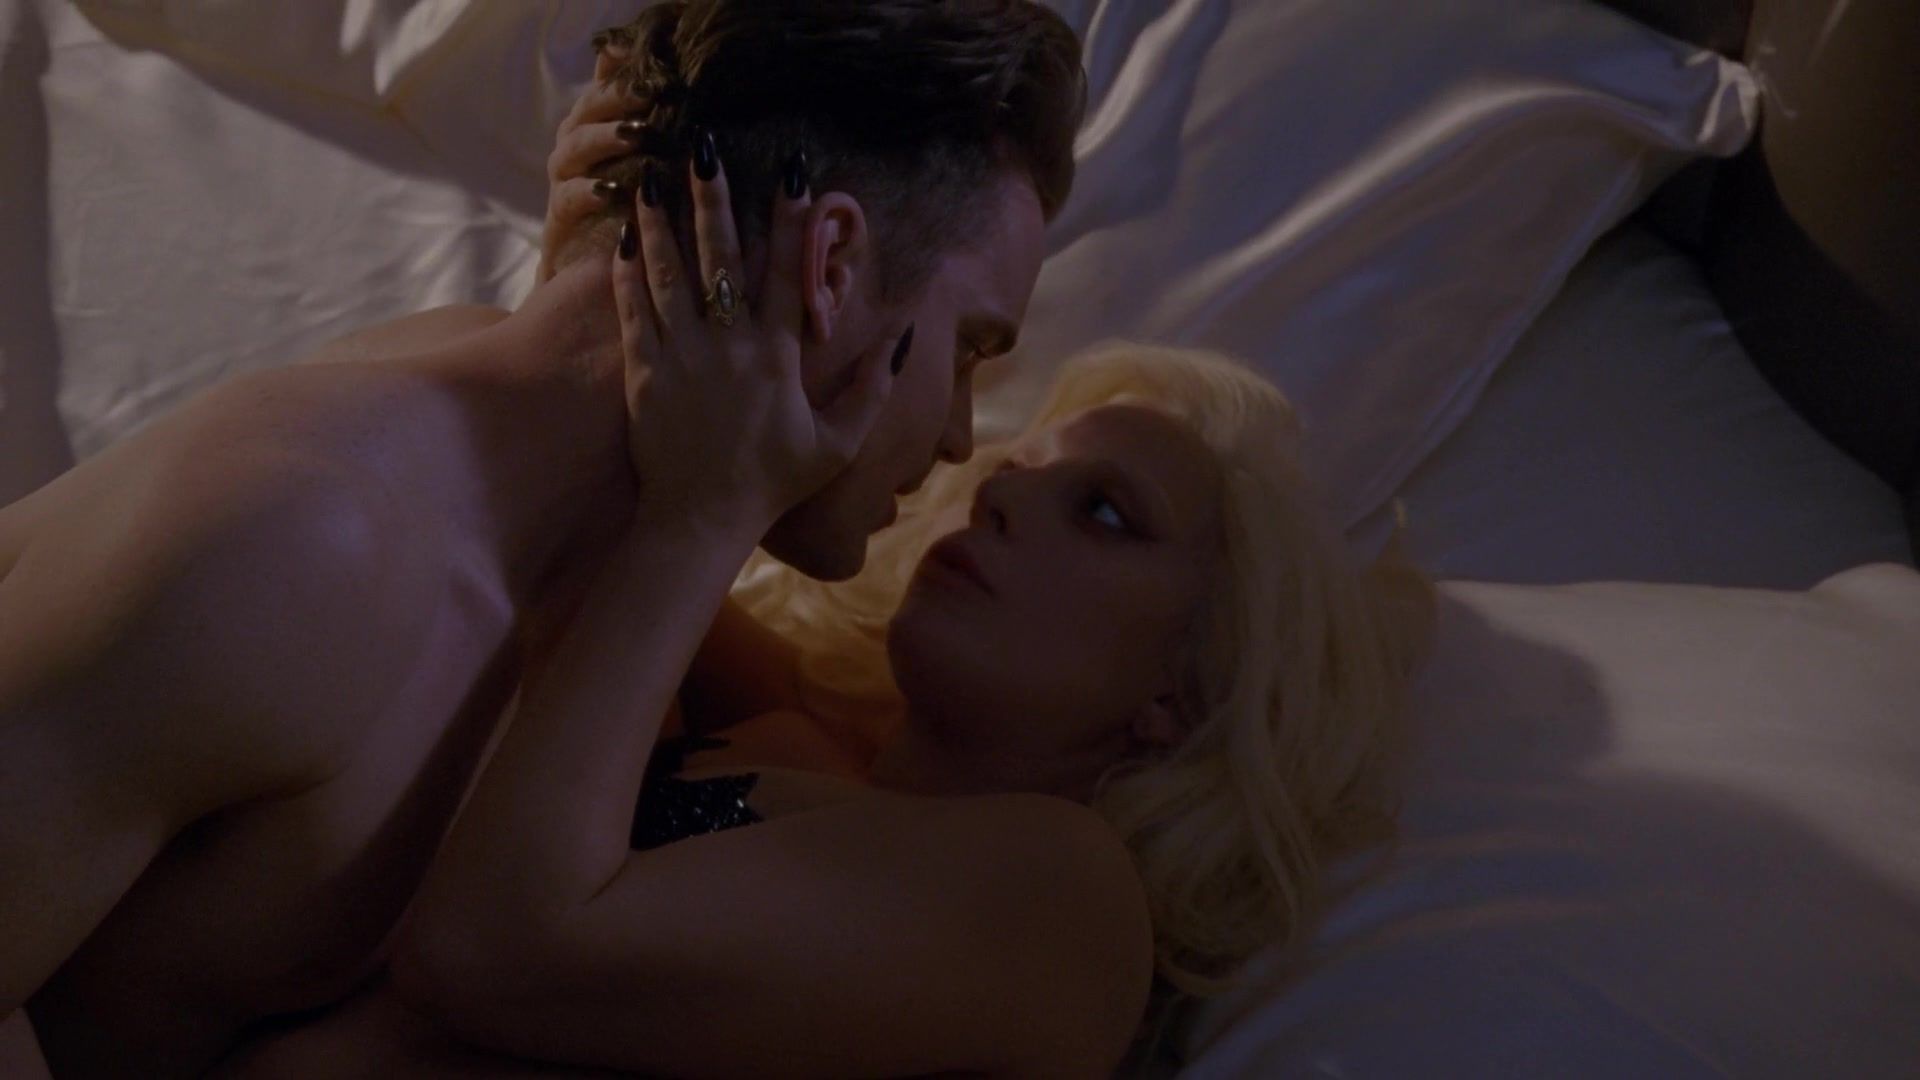 Dick Suck Naked Lady Gaga nude in American Horror Story S5 E9 Casal - 2